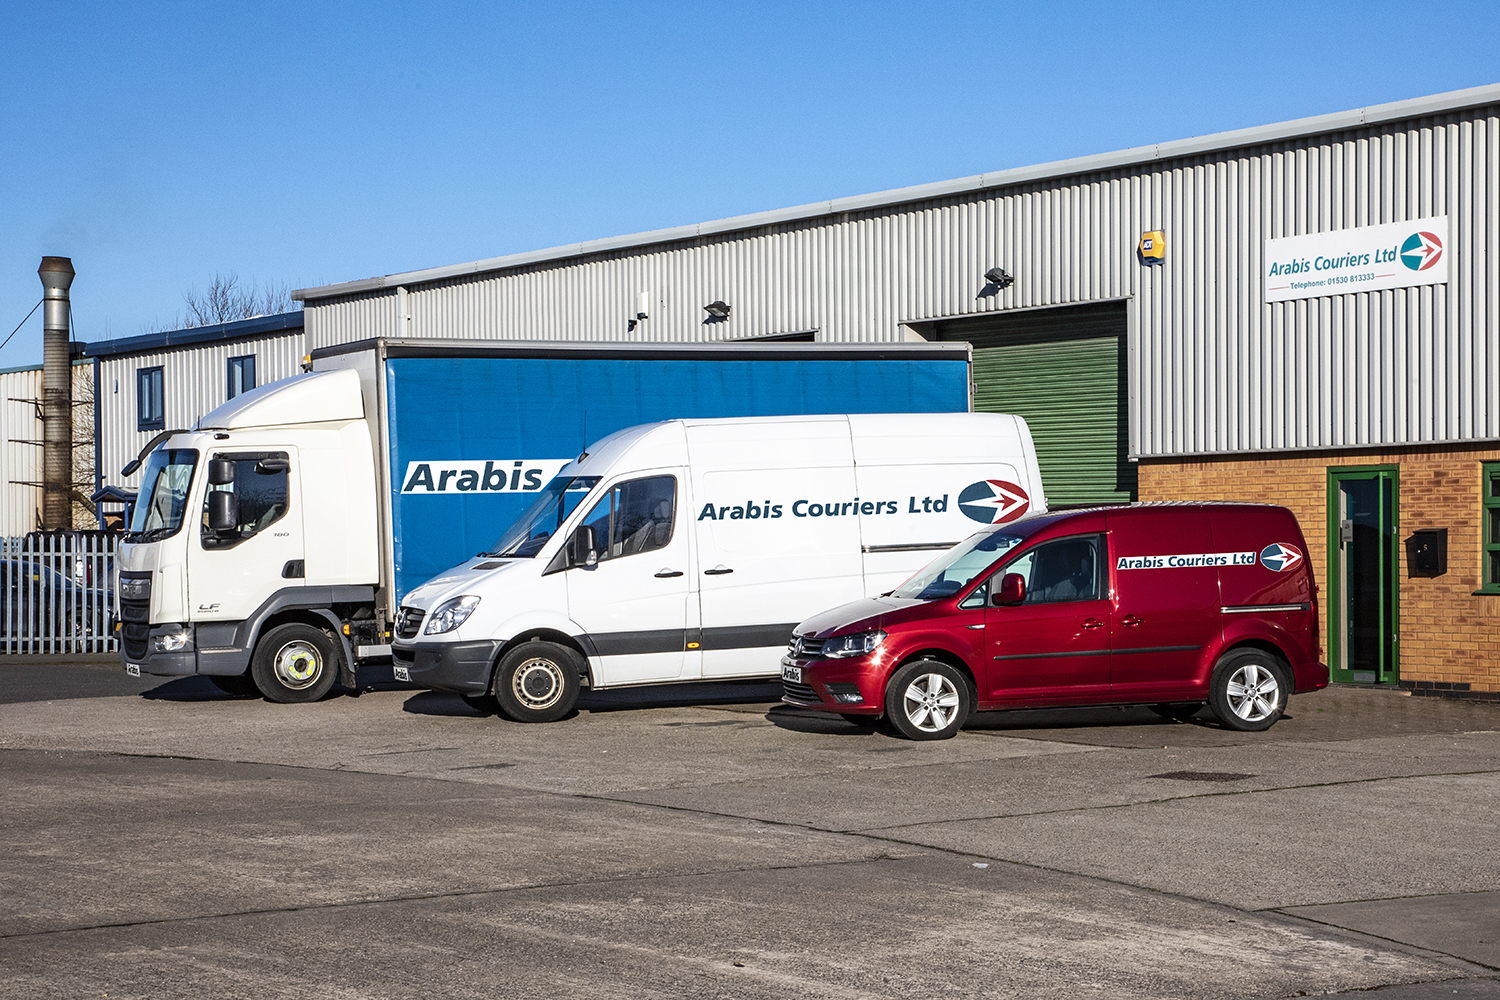 Arabis Couriers